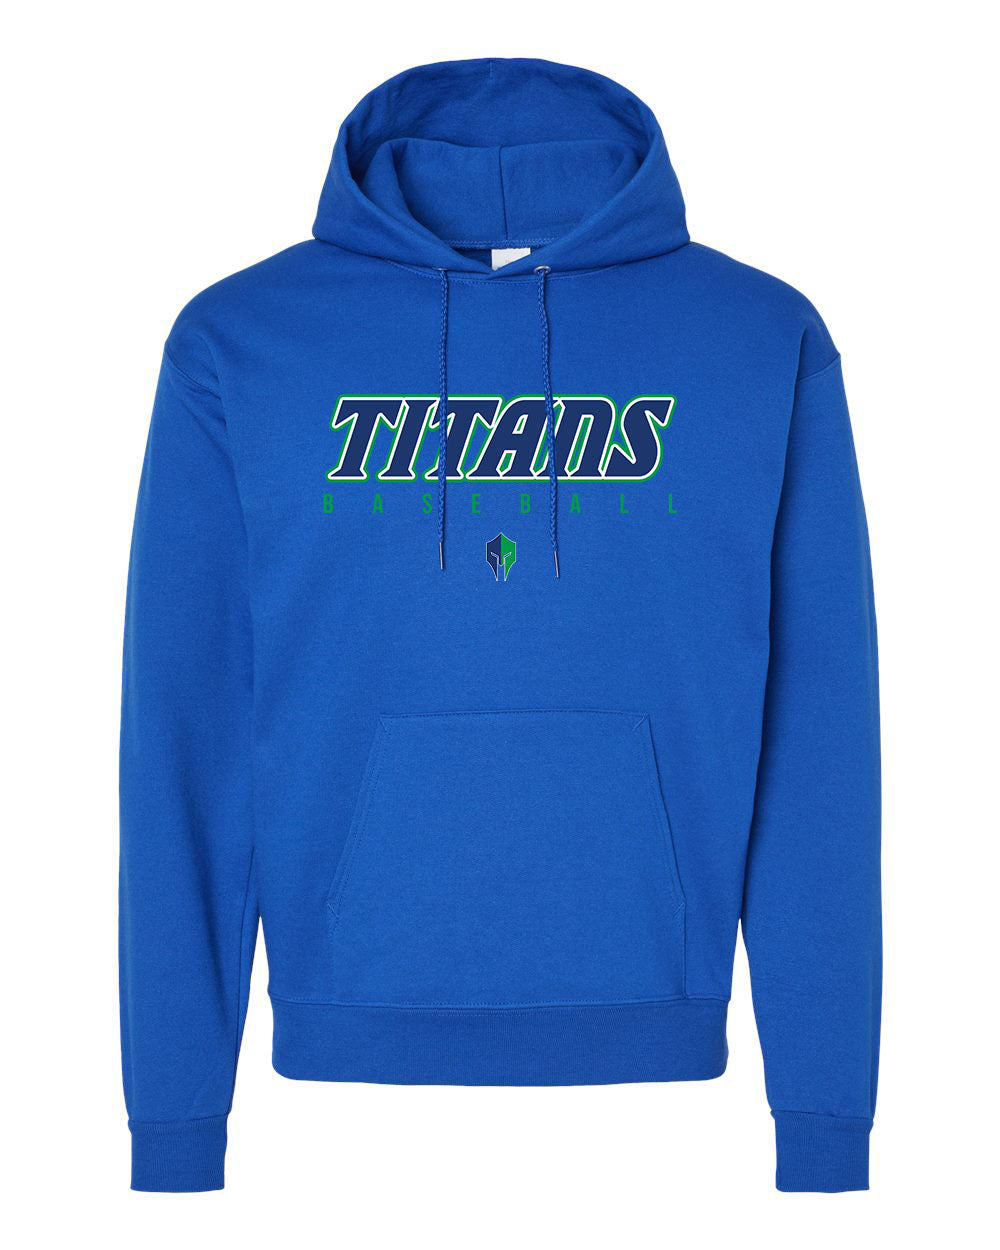 Titans Hoodie 50/50 "Titans Baseball" - 996MR (color options available)